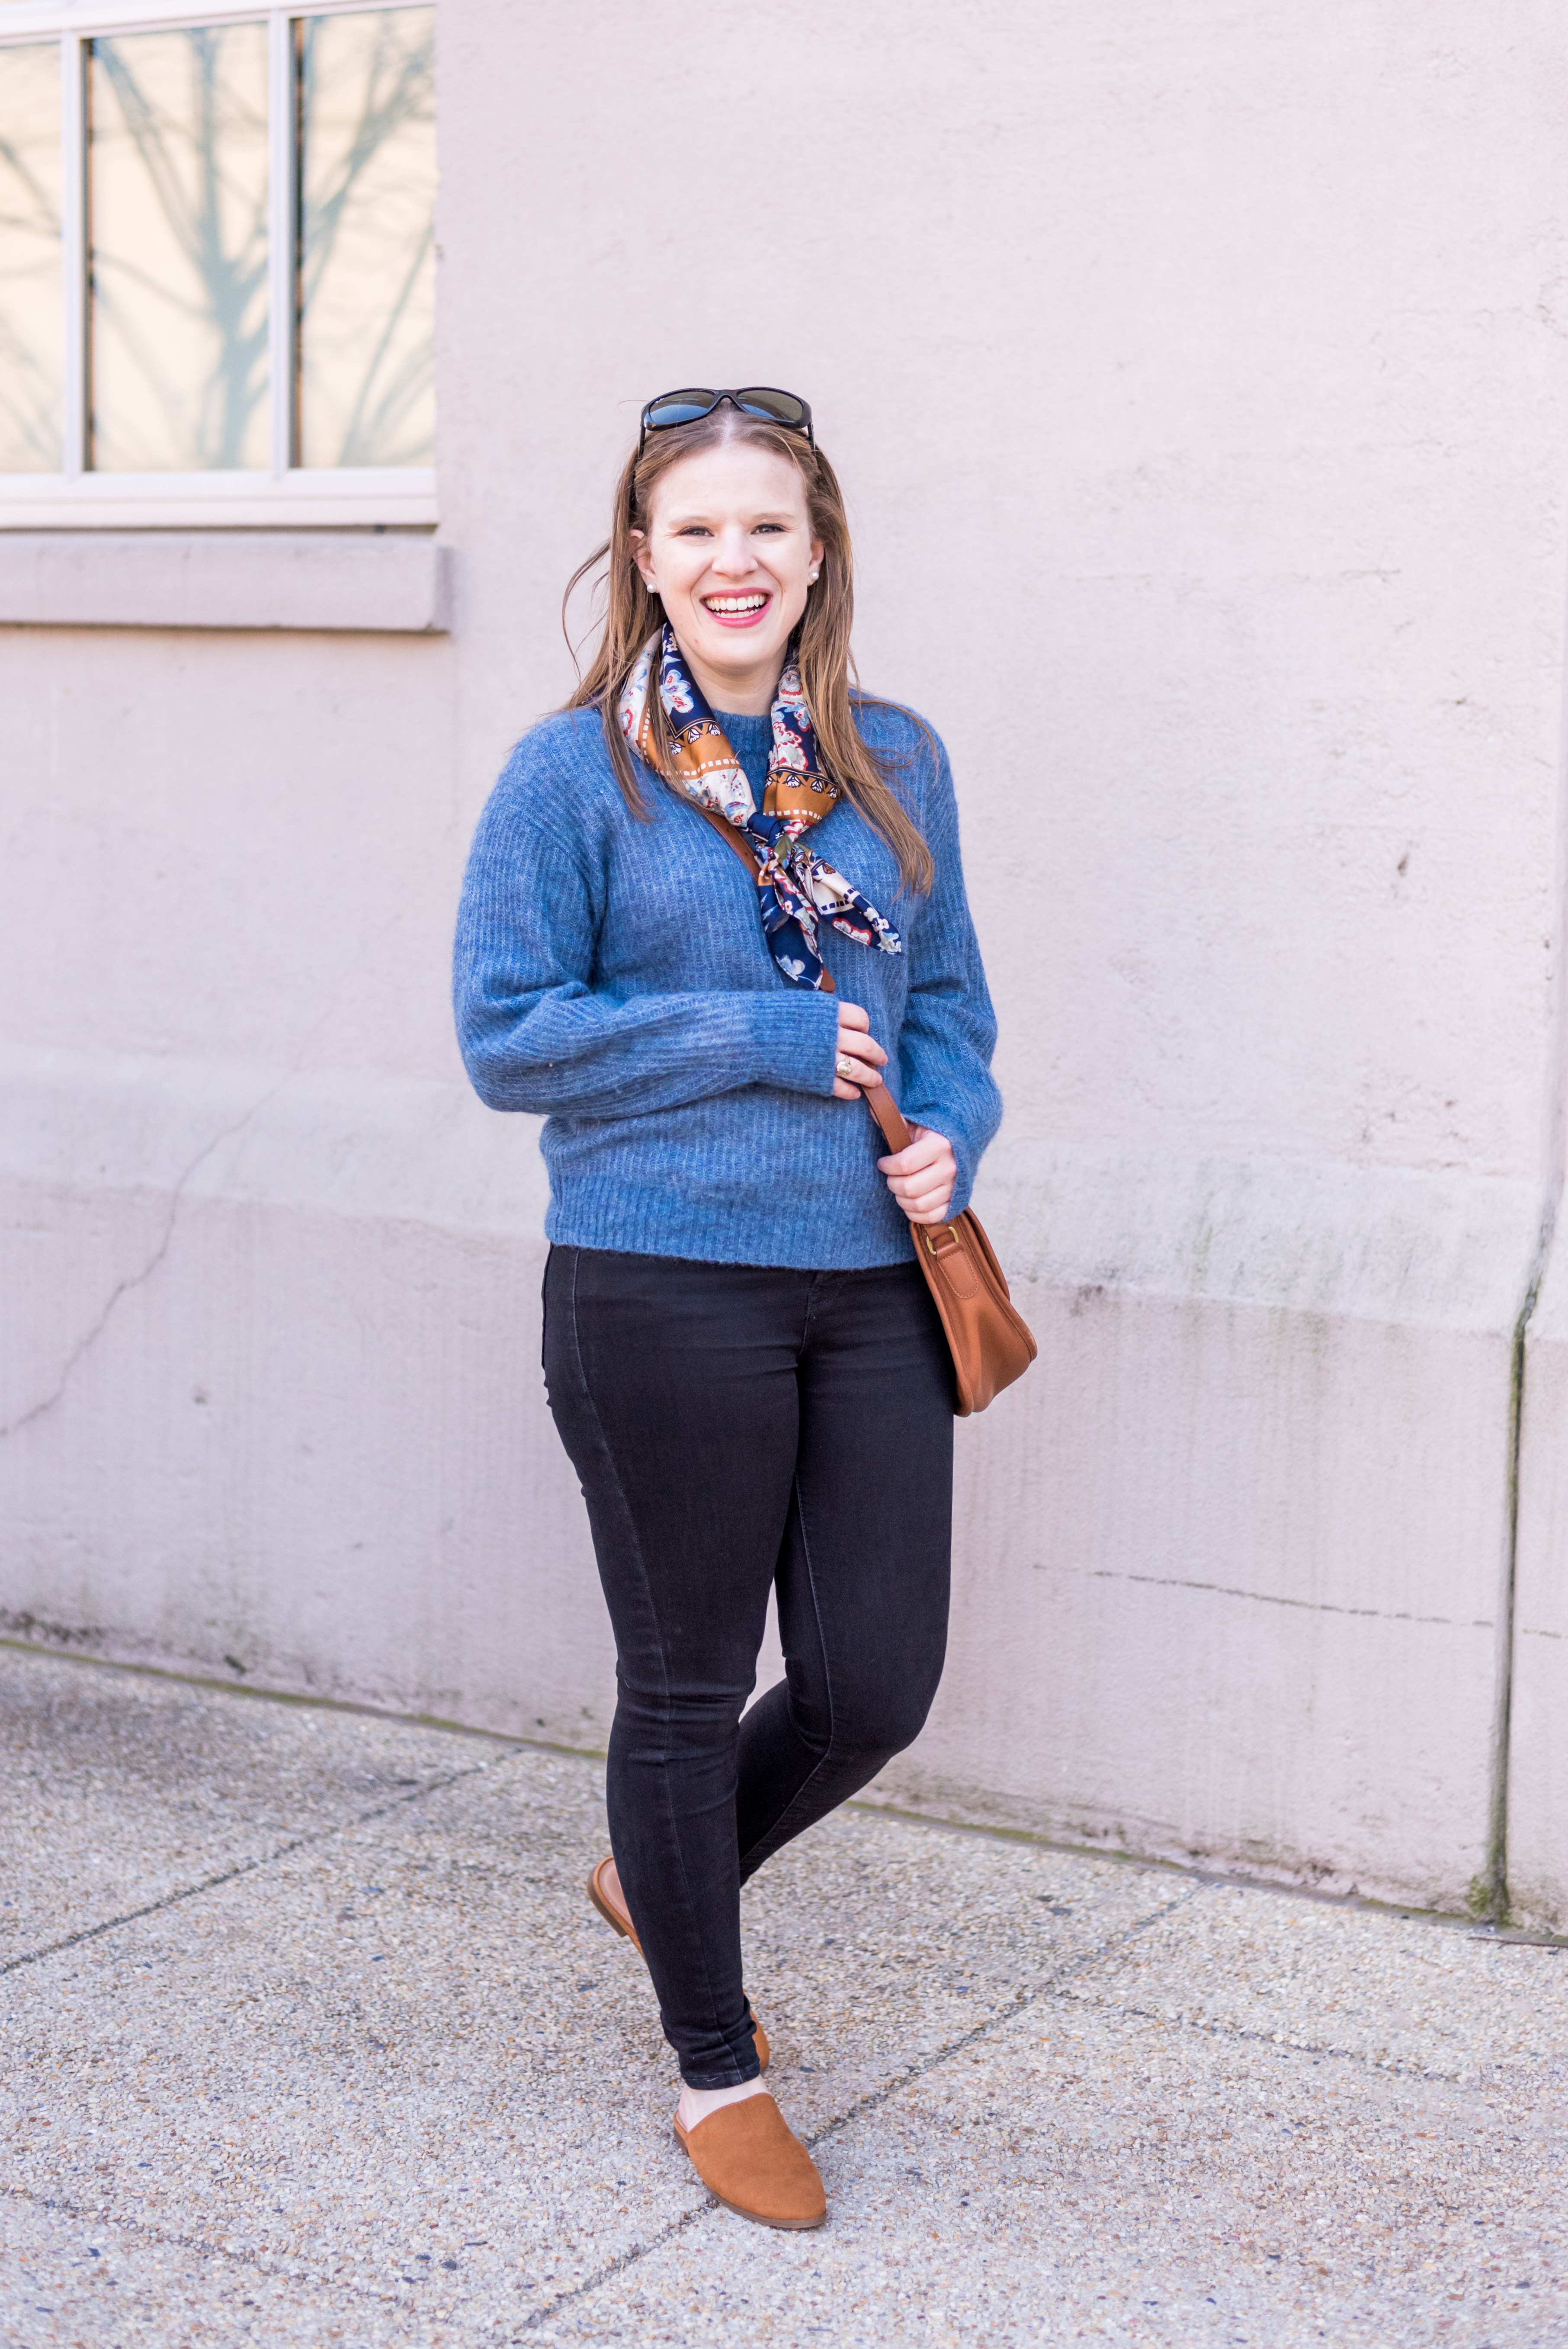 women wearing cognac mules, blue sweater, and jeans 